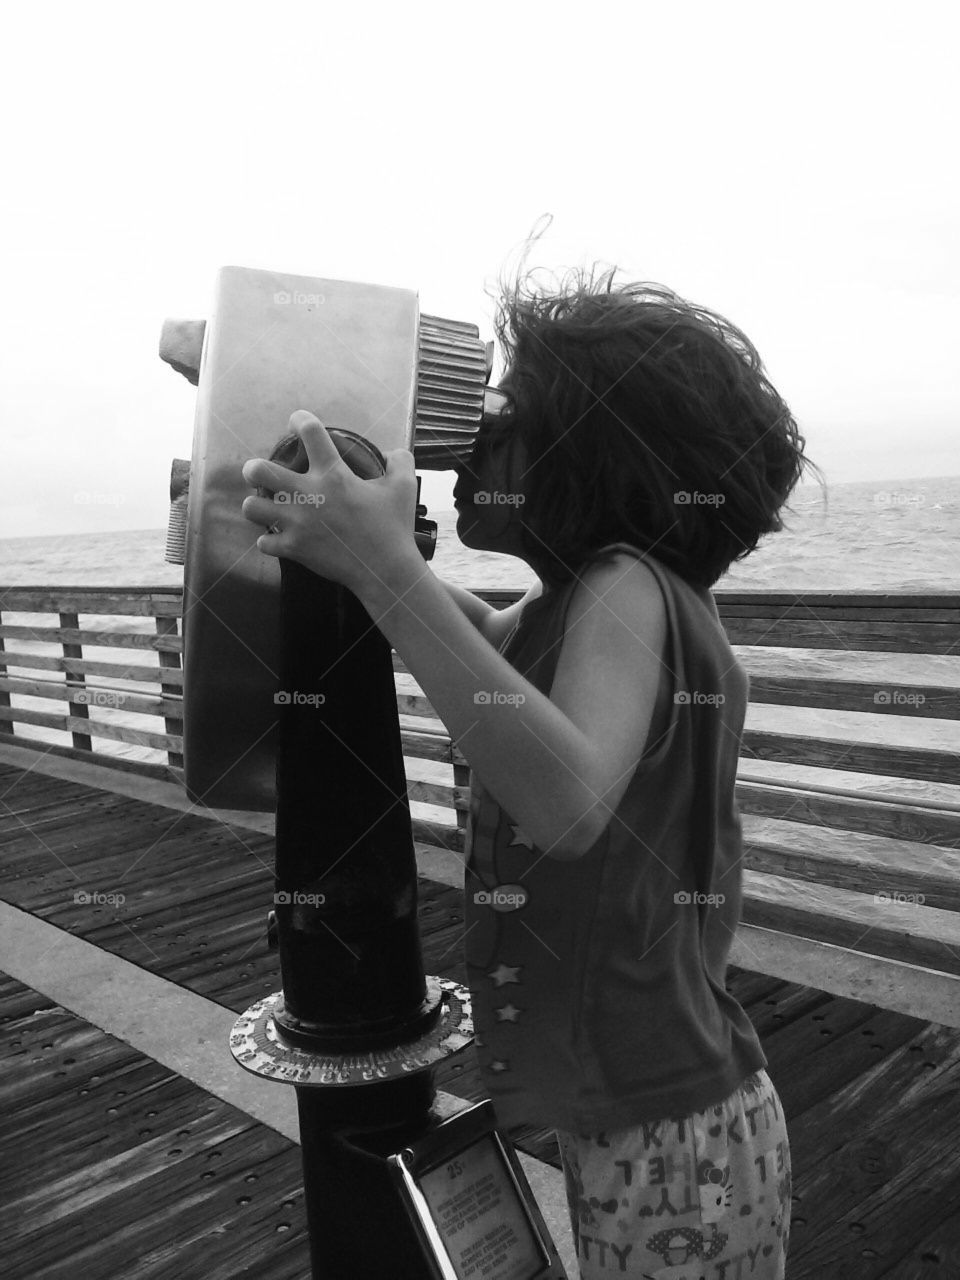 Pier life we are always here but black and white photography is the best